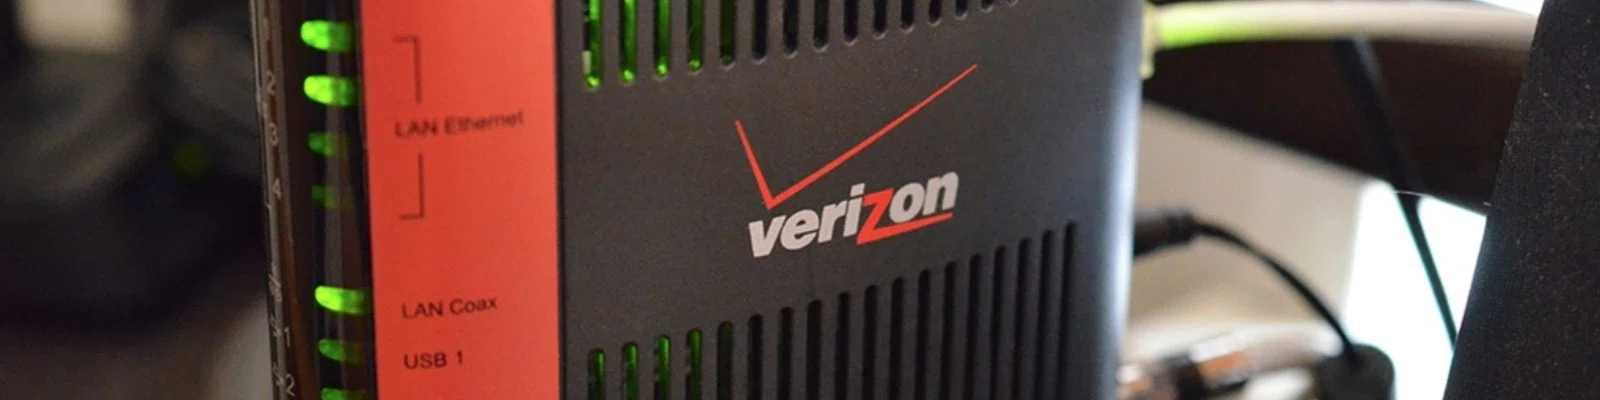 How to Get the Best Deal on Verizon Fios